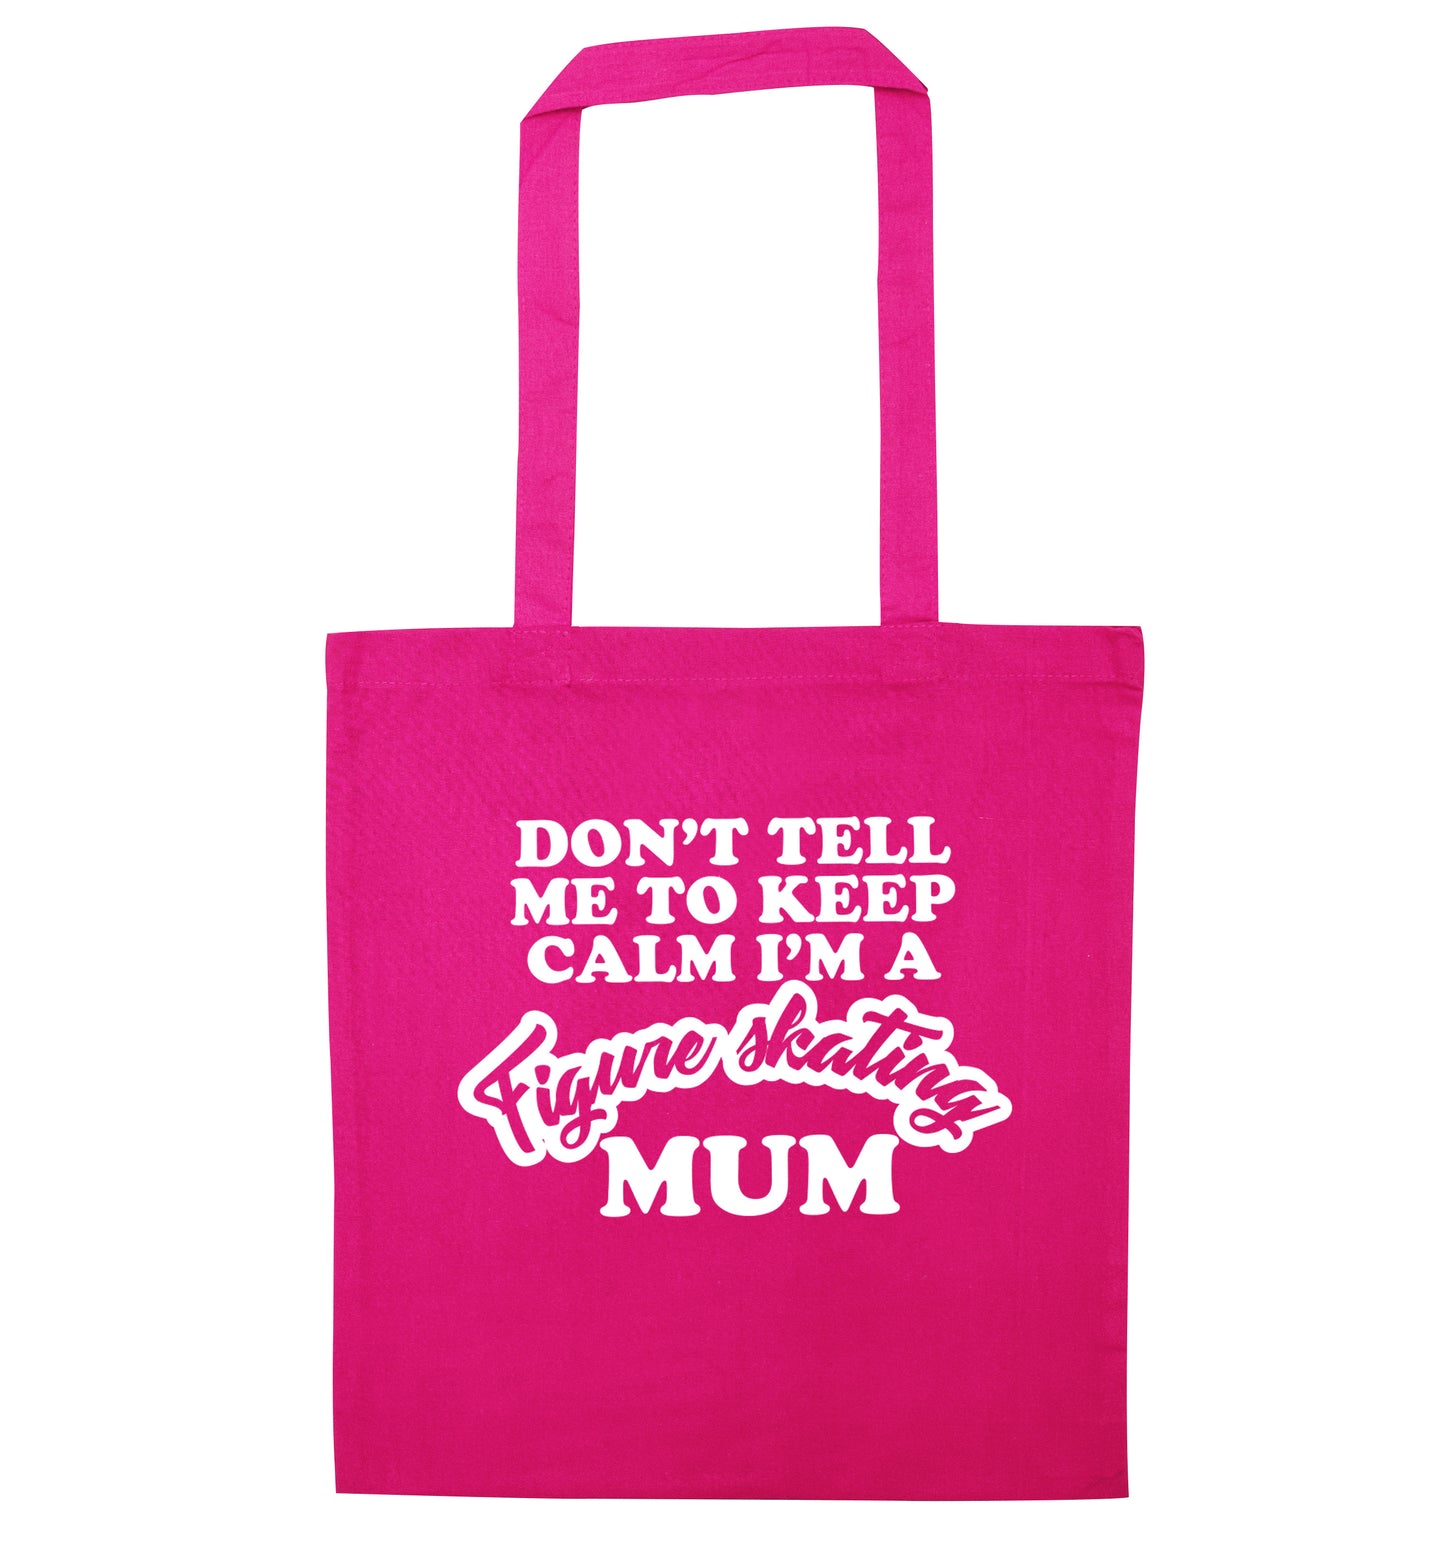 Don't tell me to keep calm I'm a figure skating mum pink tote bag